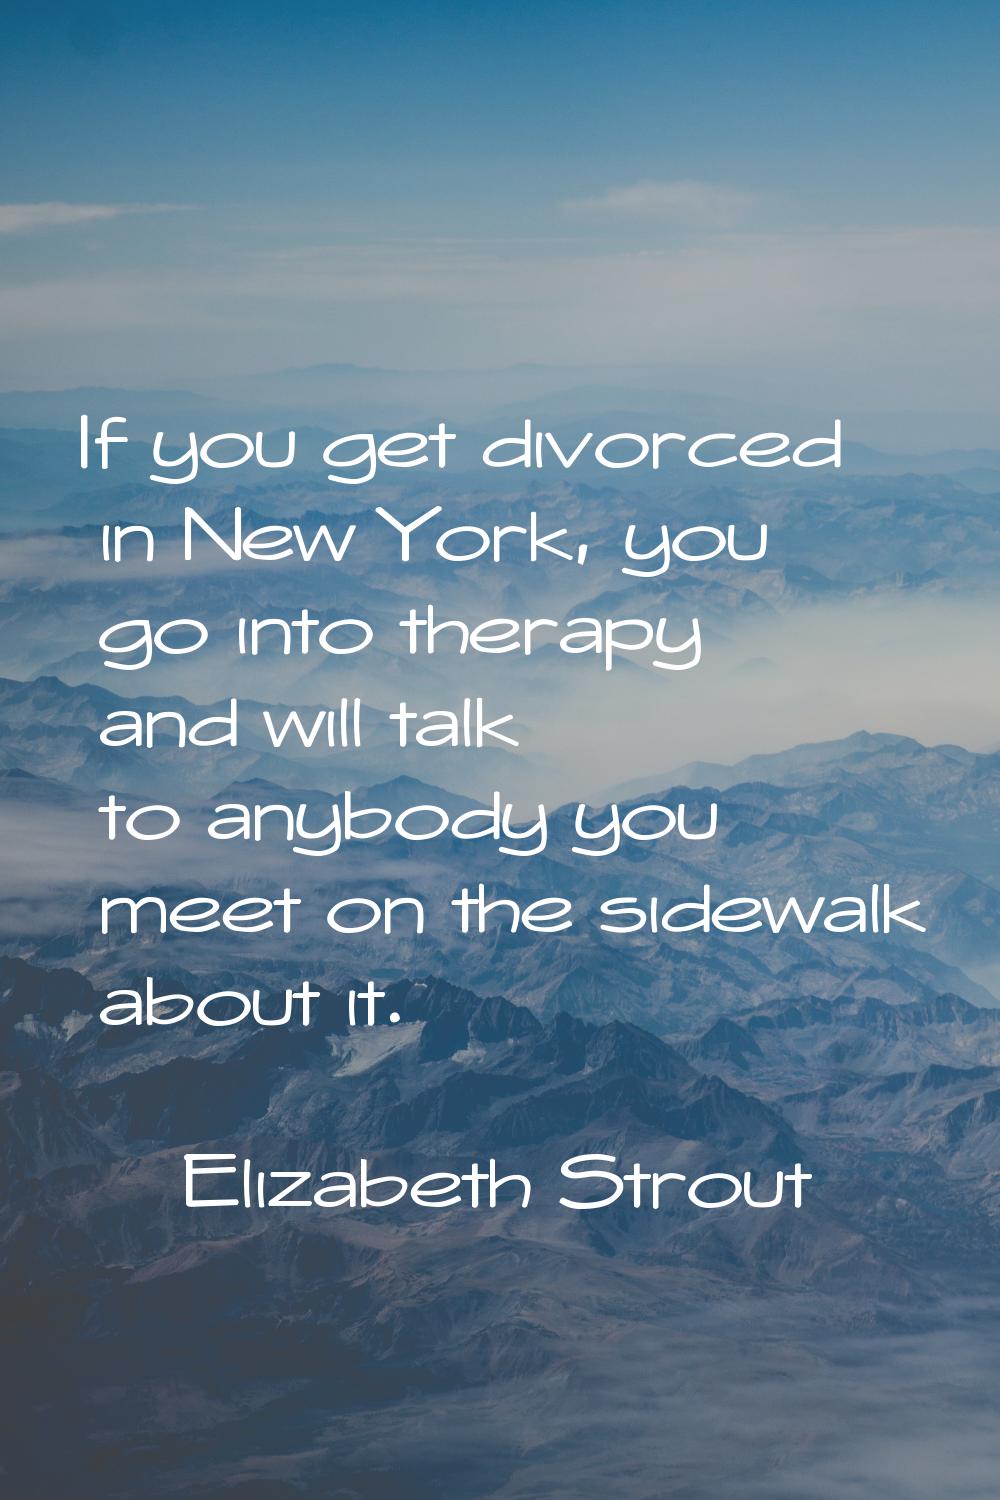 If you get divorced in New York, you go into therapy and will talk to anybody you meet on the sidew